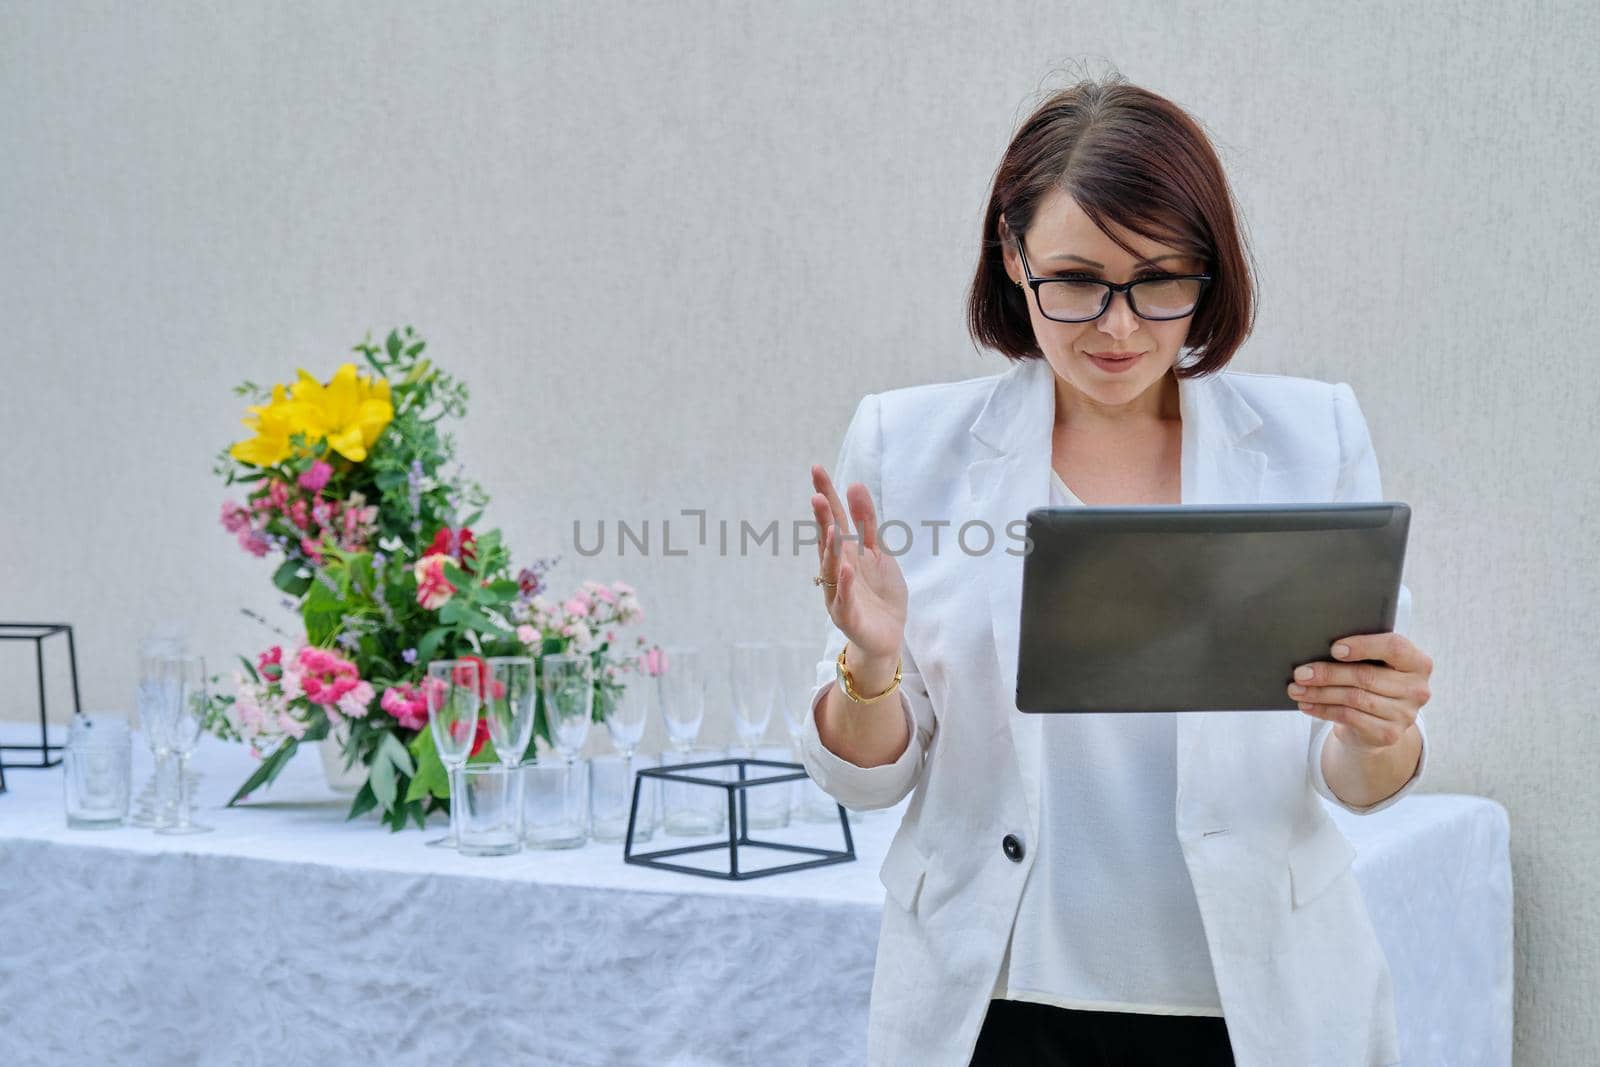 Organization of parties, ceremonies, professional woman event organizer with digital tablet, reserved holiday table decorated with flower arrangements. Female small business owner